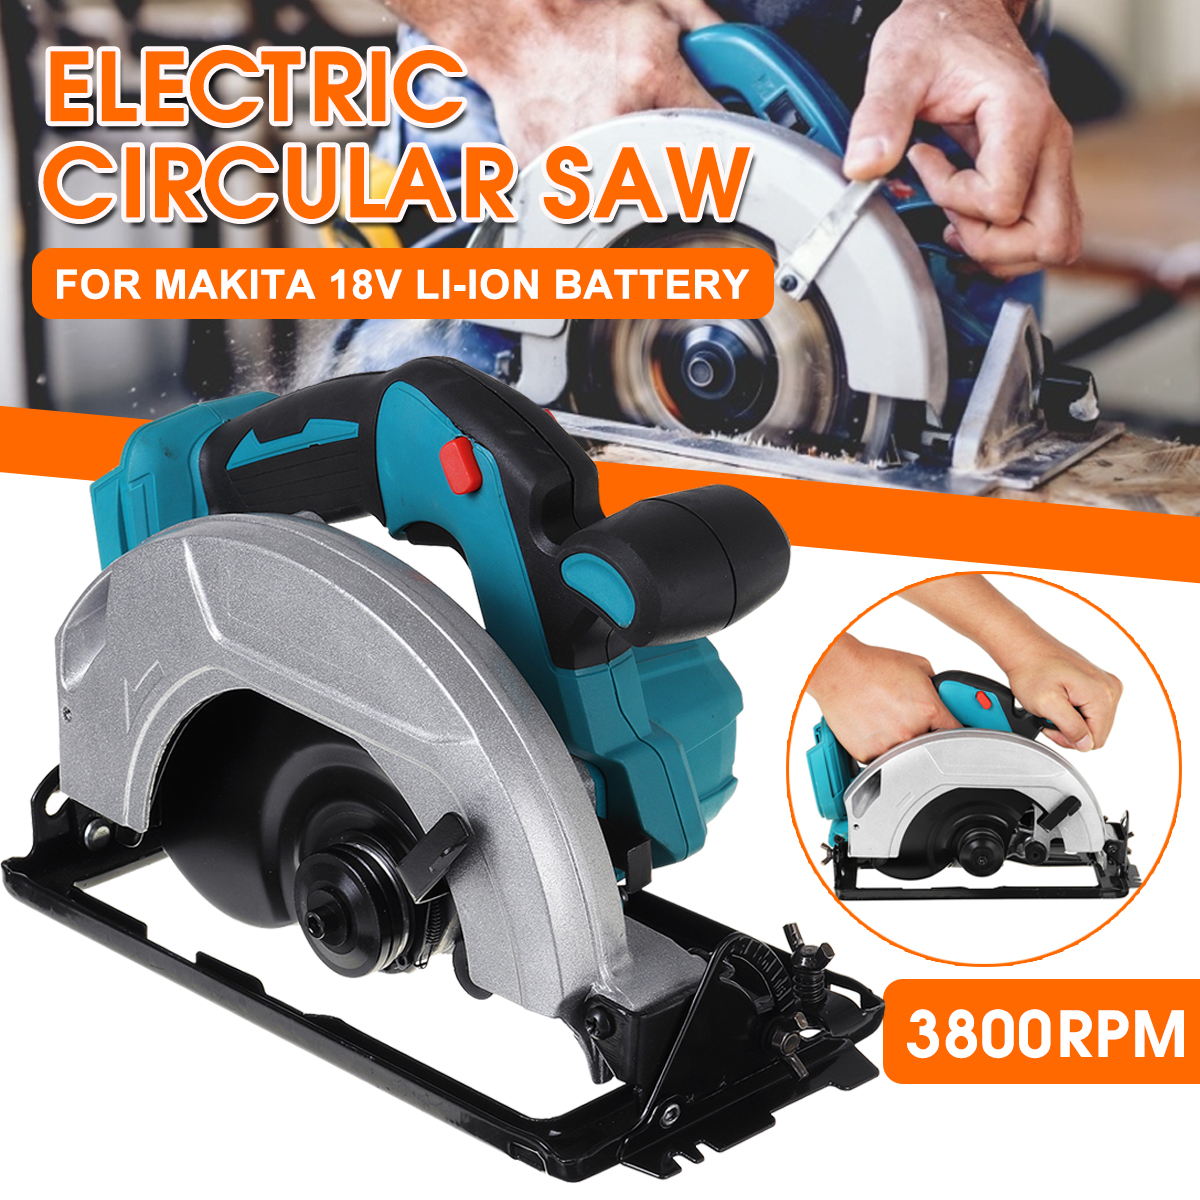 Image showing the electric circular saw